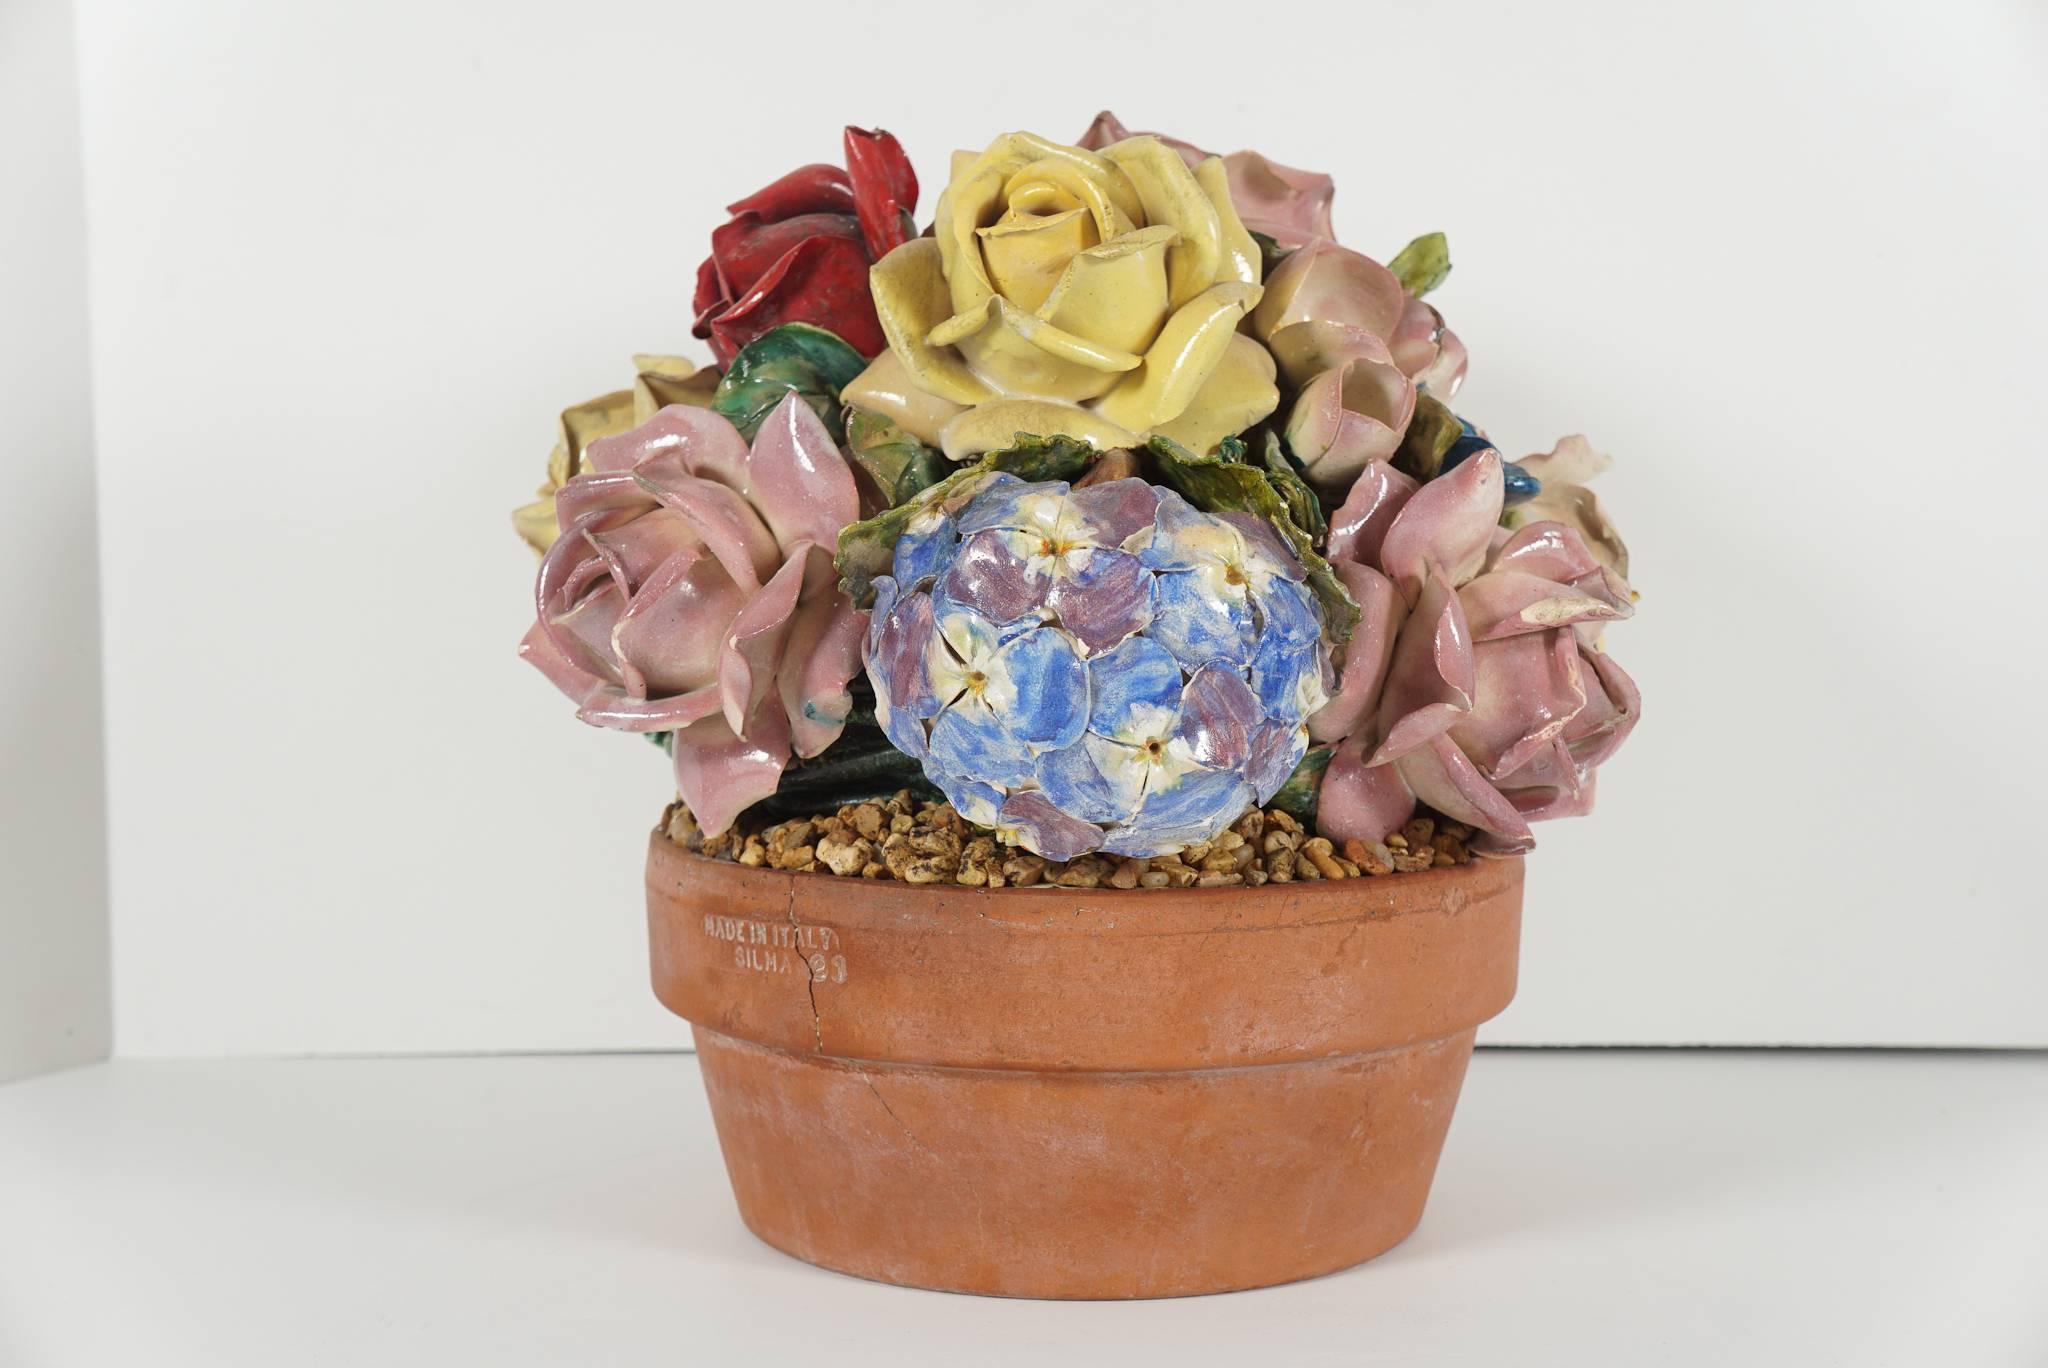 American Glazed Ceramic and Terra Cotta Floral Arrangment from the Estate of Bunny Mellon